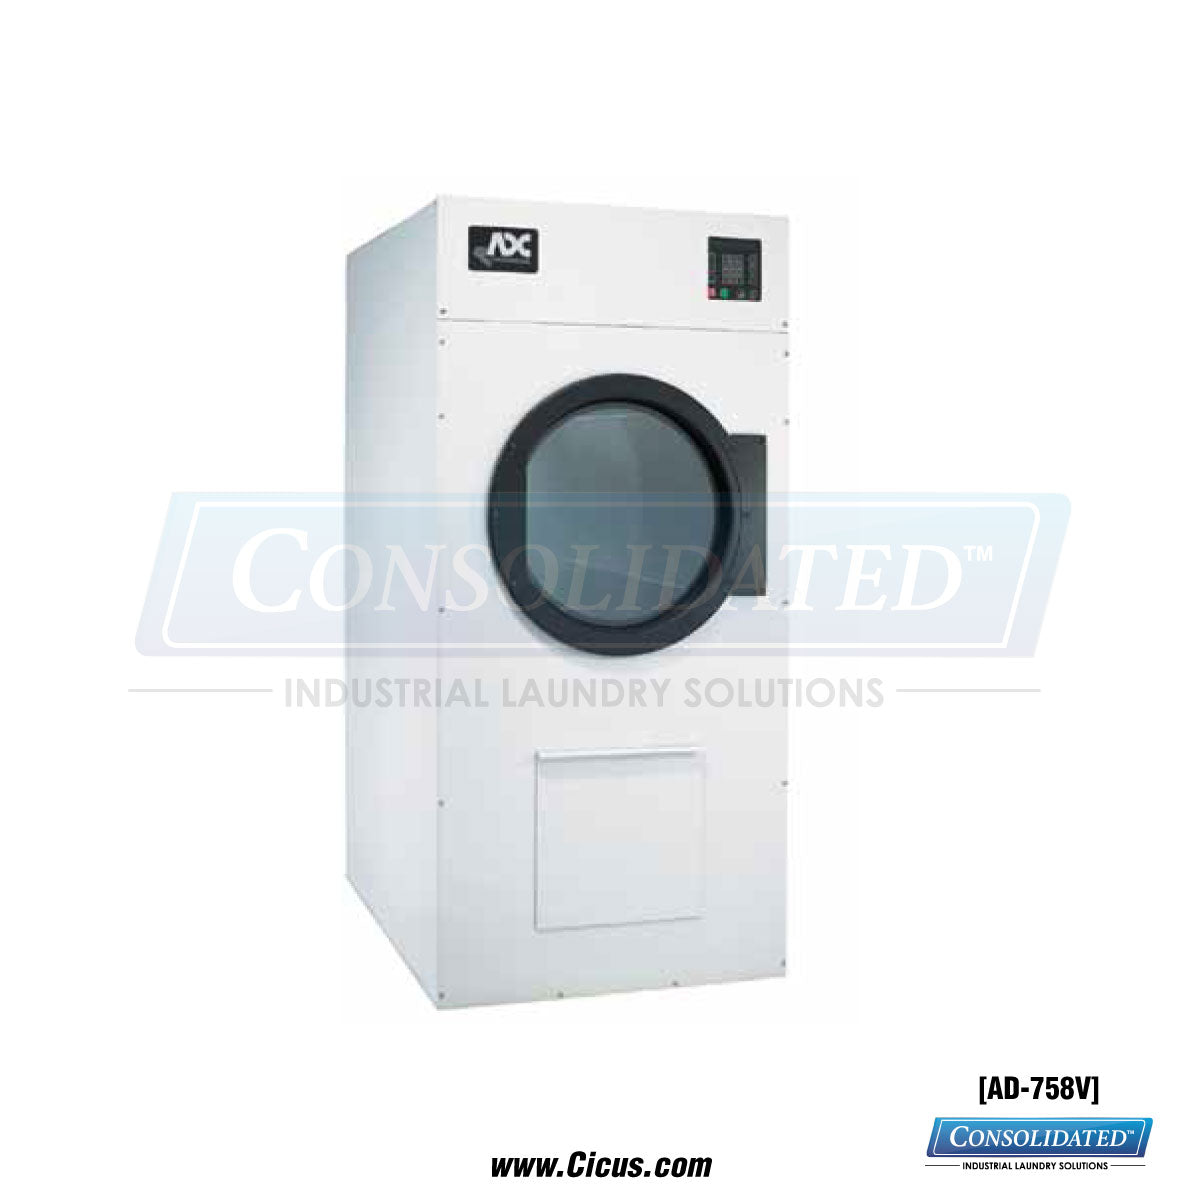 ADC 75-lb Capacity OPL Dryer [AD-758V] - Front View